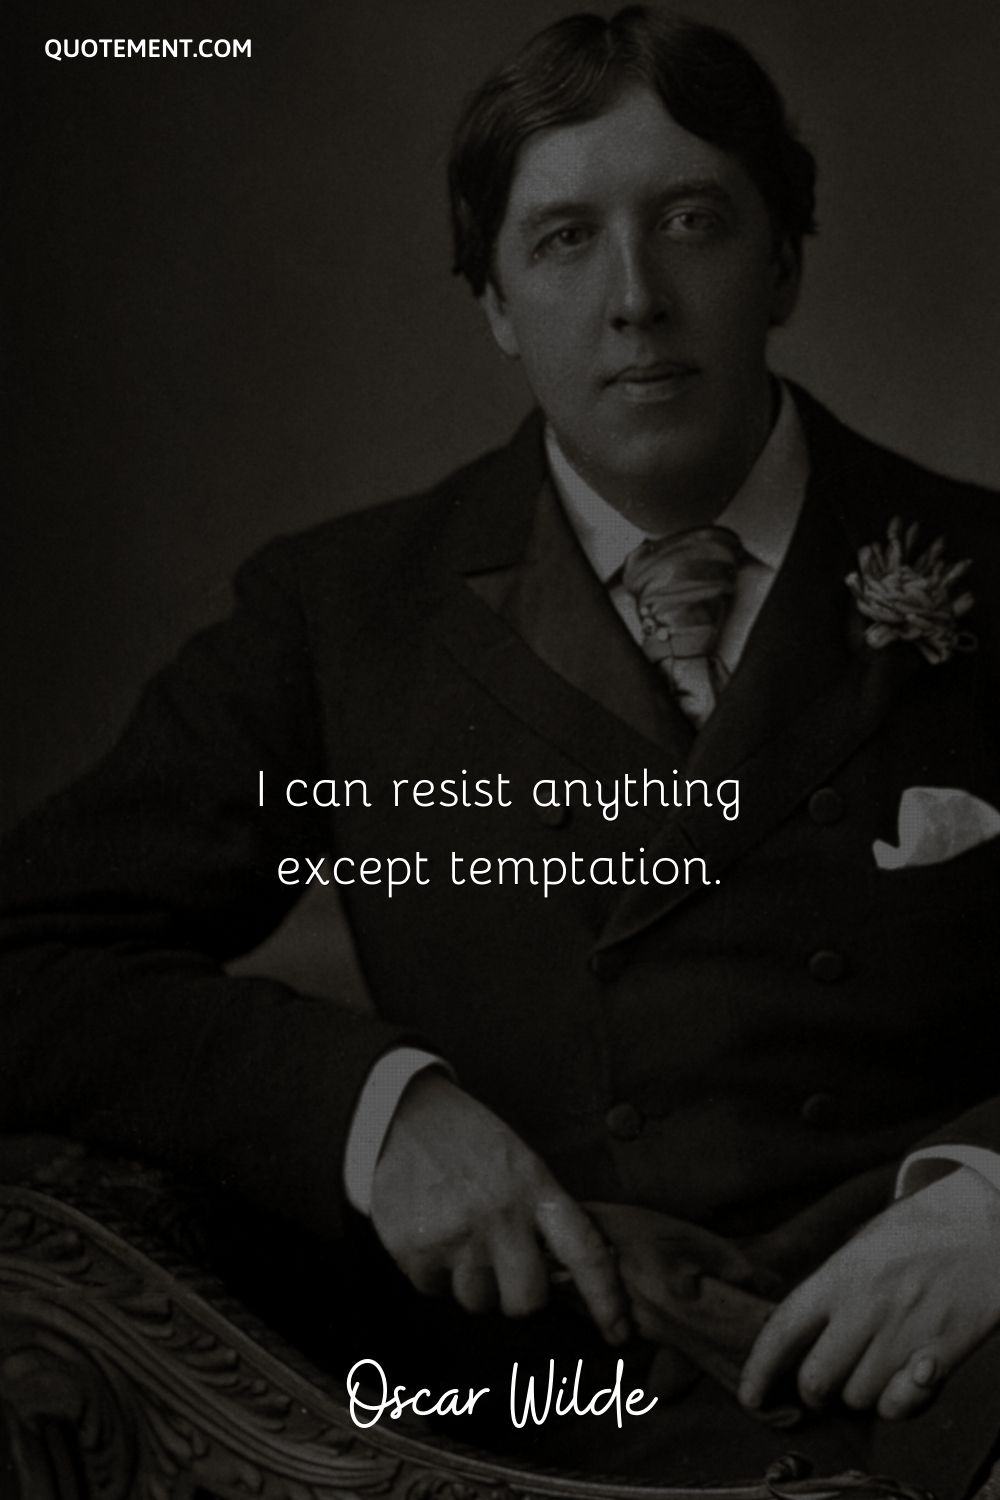 Wilde quote on life and Oscar's portrait.